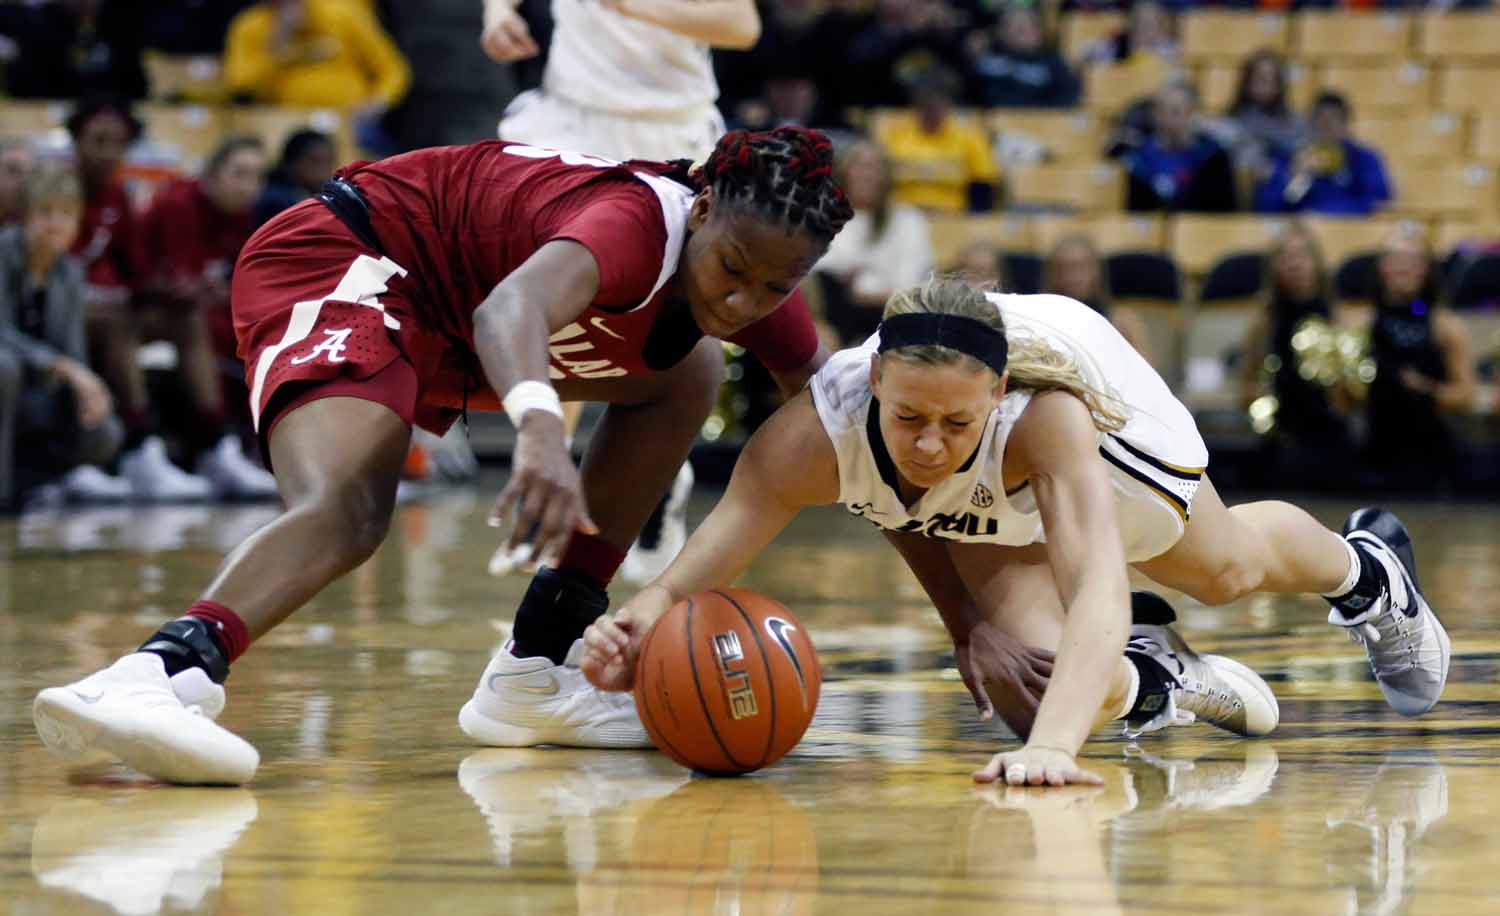 Sophie Cunningham (3) lunges for the ball before Alabama's freshman guard Shaquera Wade (23) can take control of it during the second half of the game Thursday evening, Feb. 11, 2016 at Mizzou Arena.